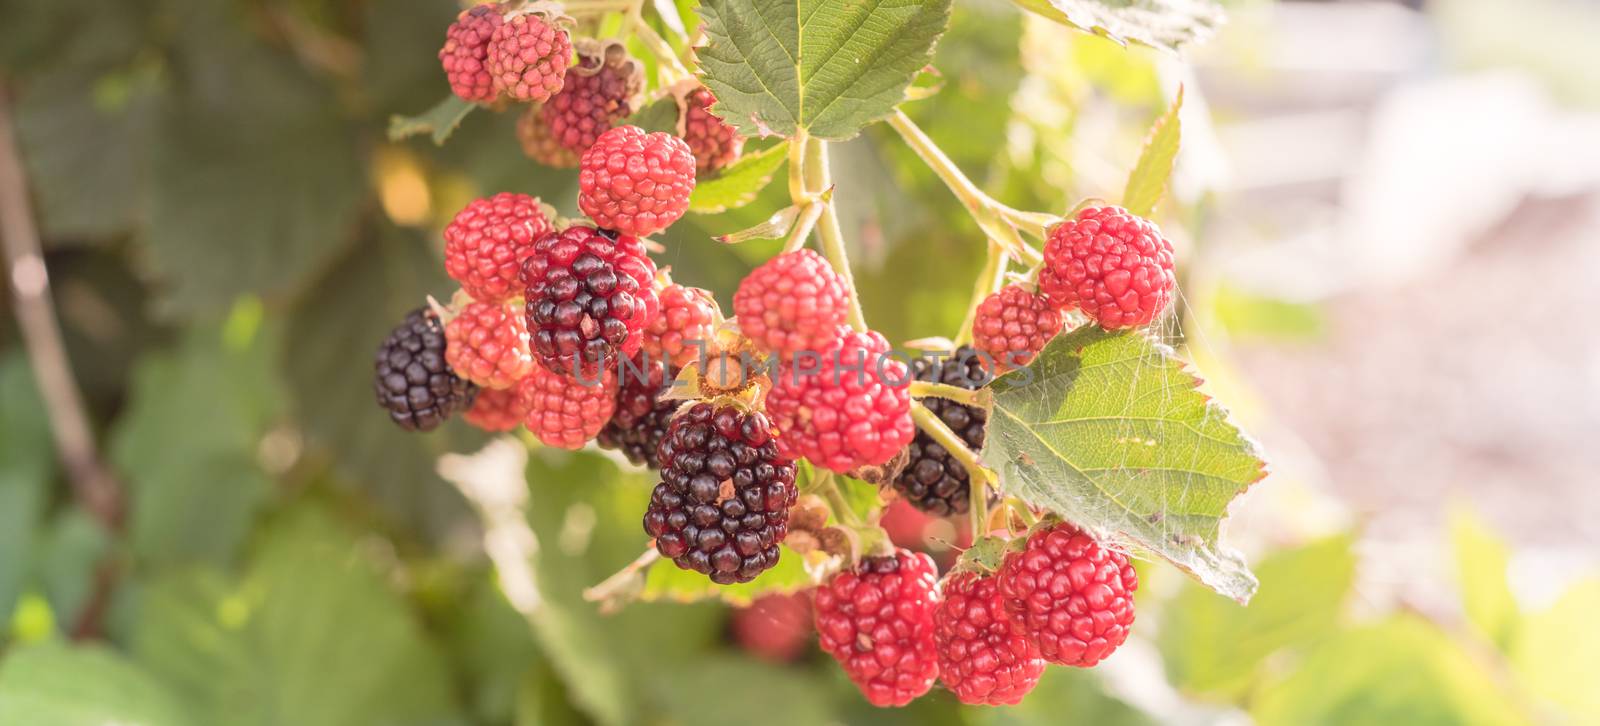 Panoramic group of organic ripe and unripe blackberries growing on tree in Texas, America by trongnguyen